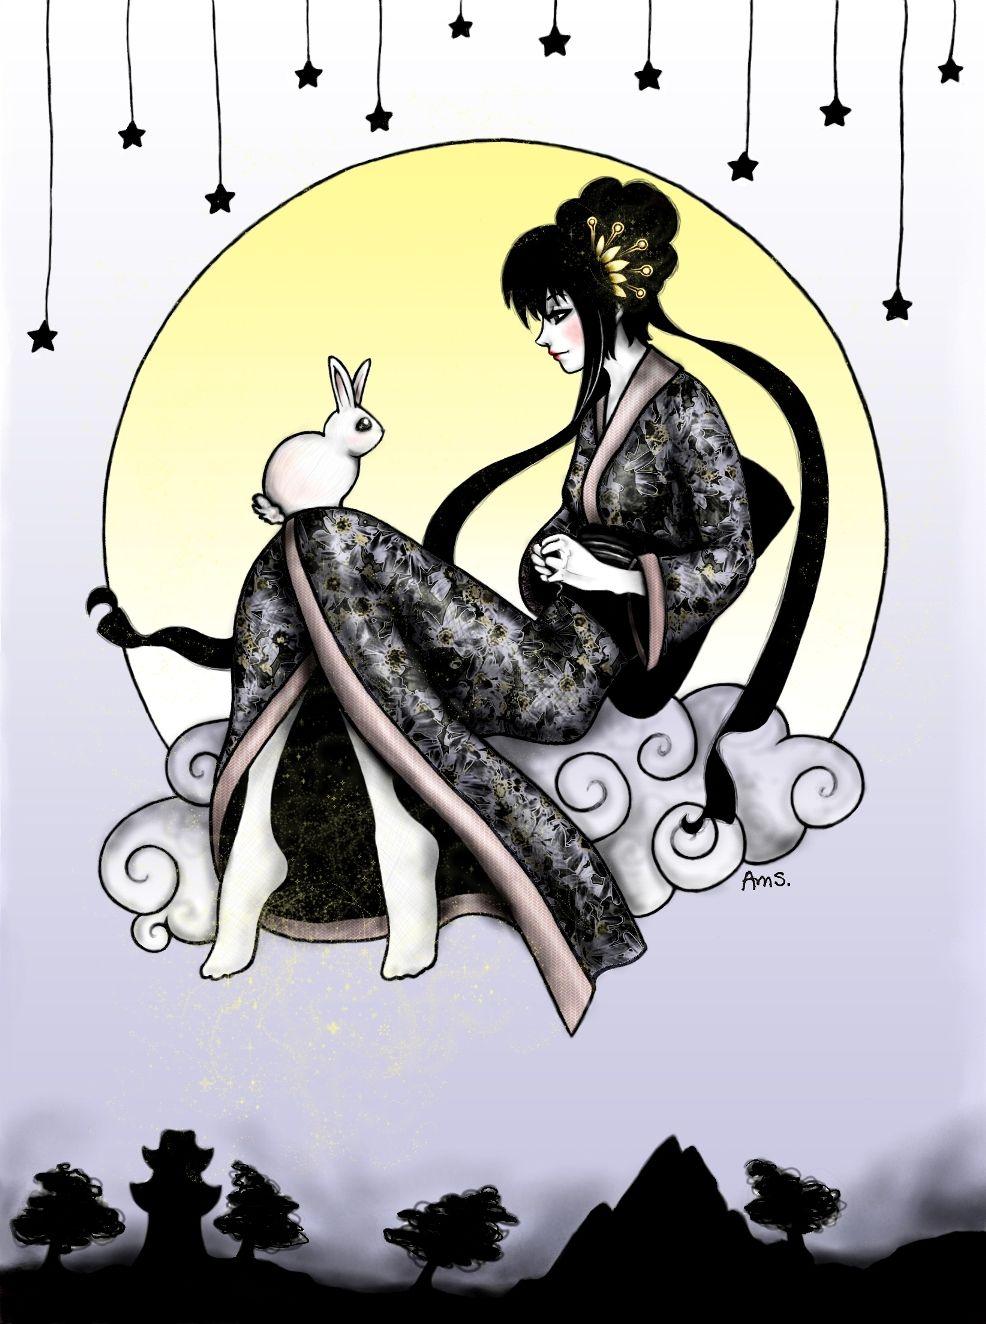 Chang'e and the Jade Rabbit. Pieces of me. Jade rabbit